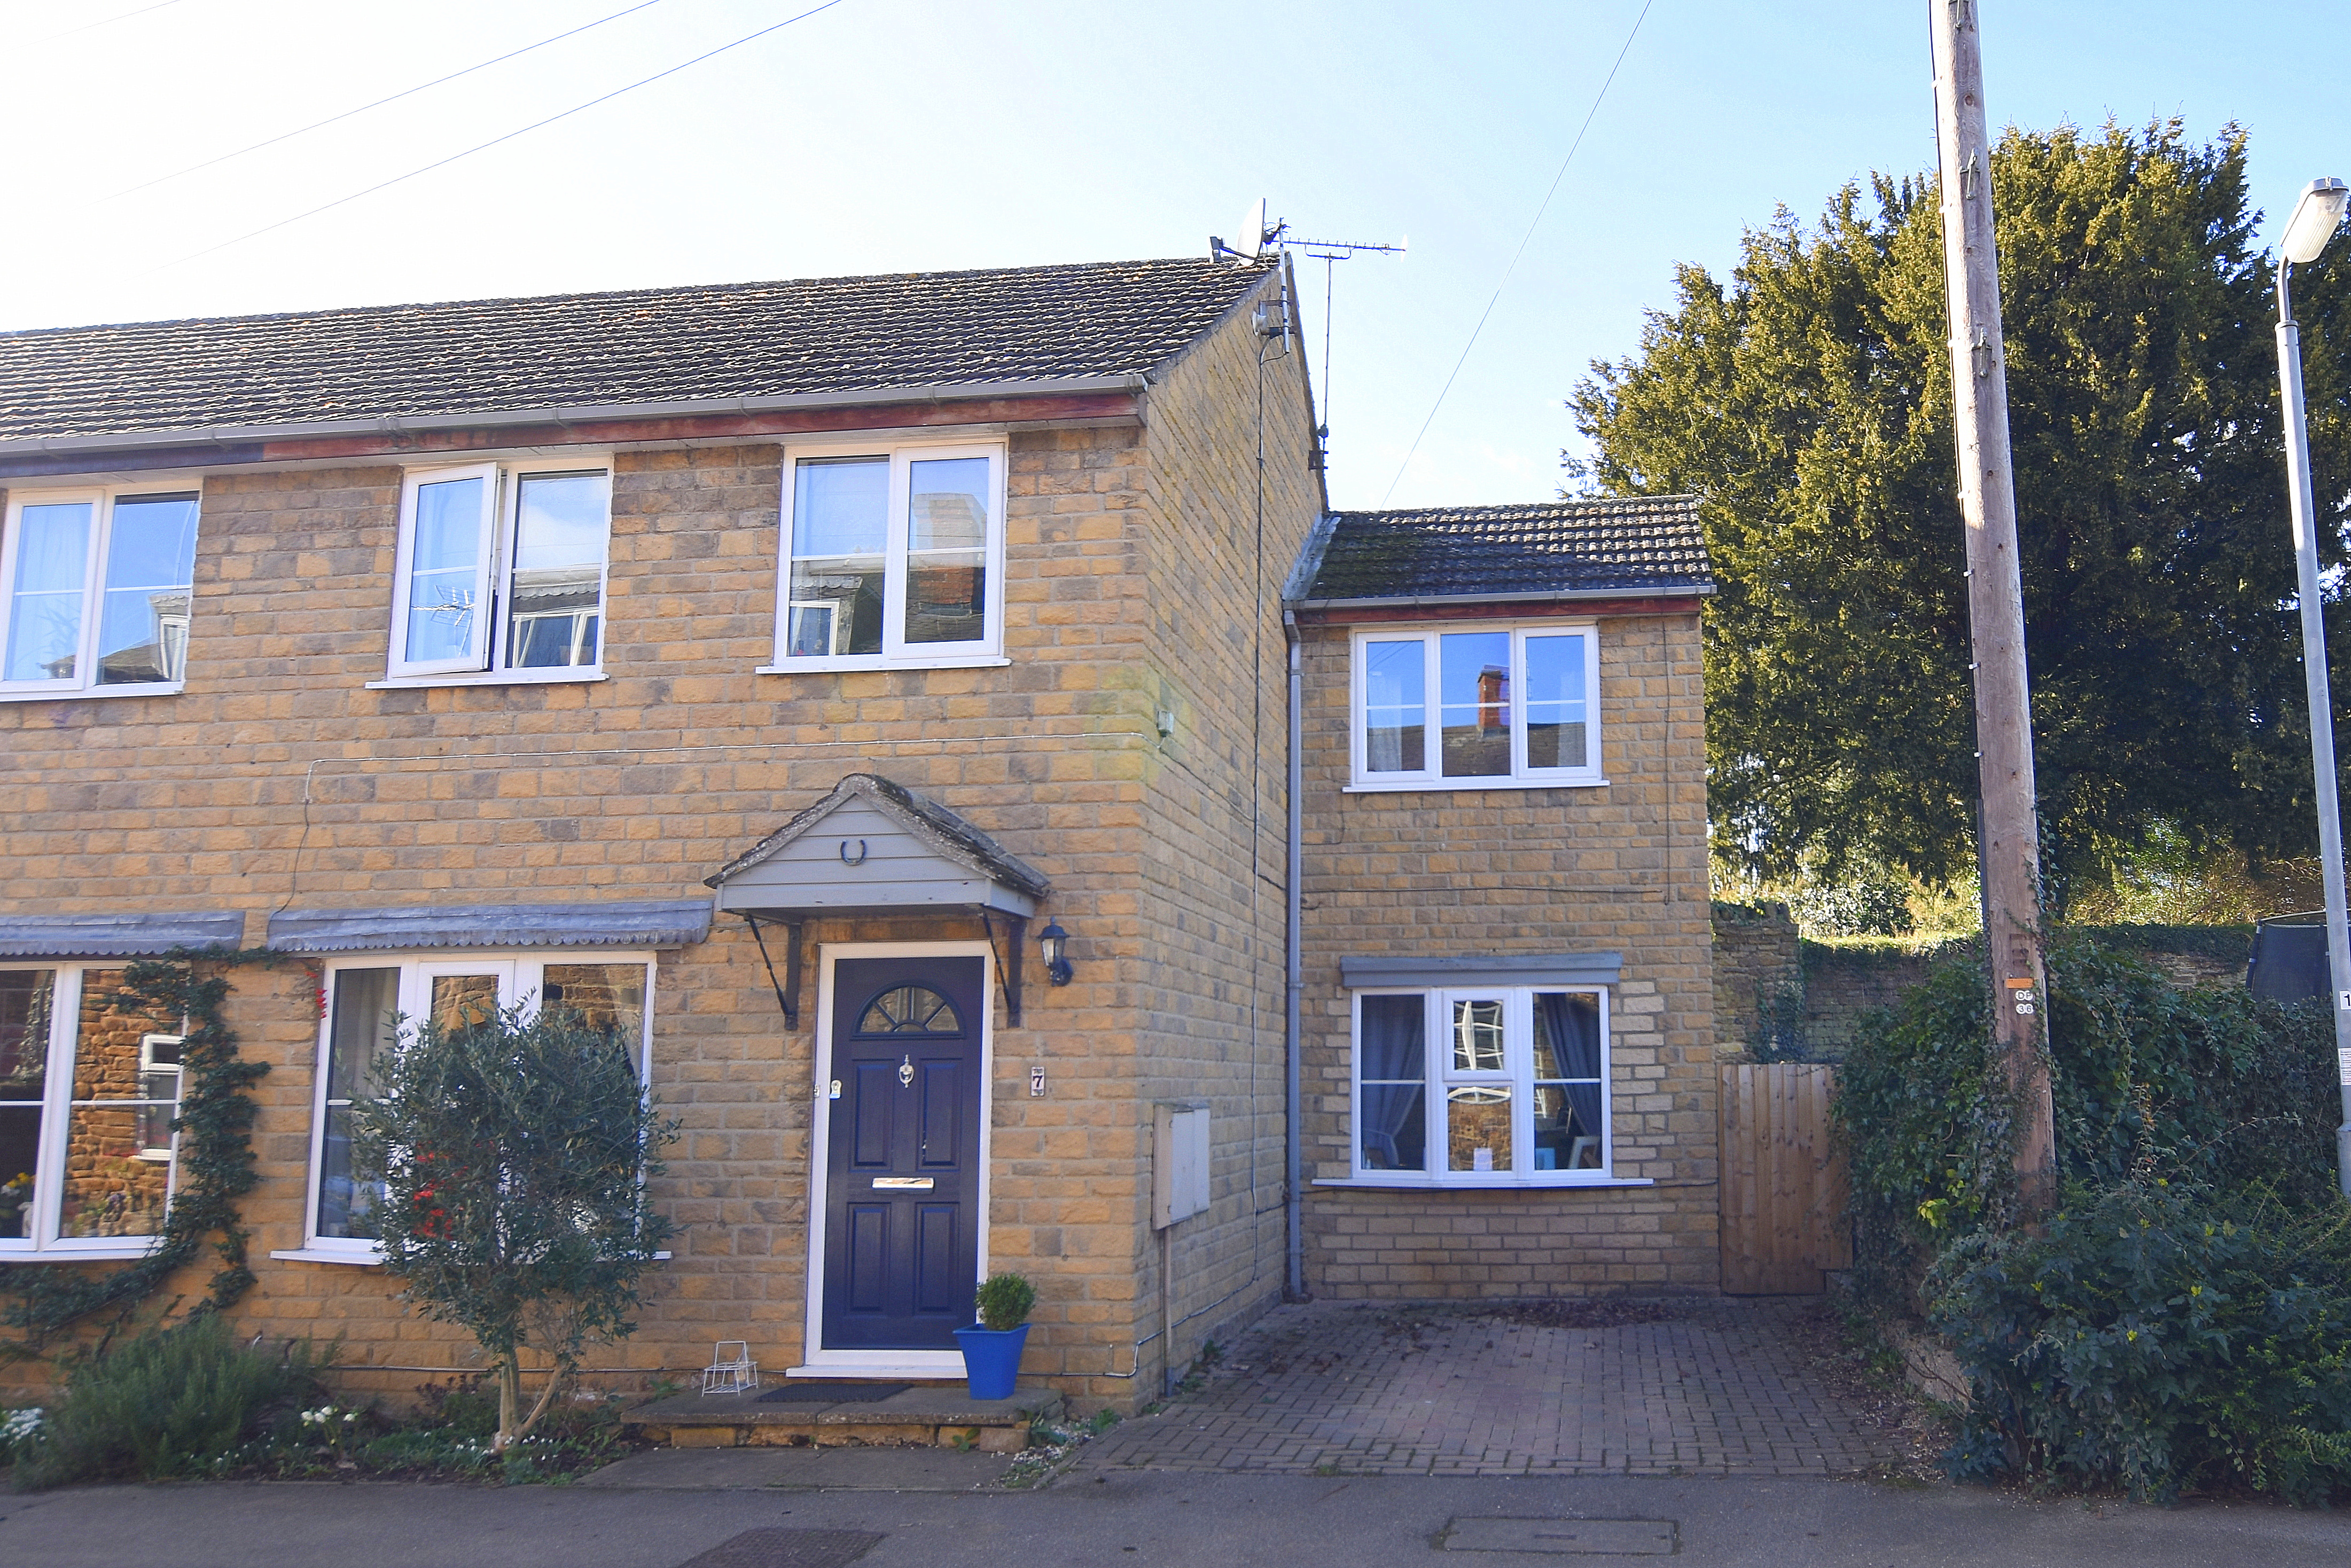 3 bed  for sale in Queen Street, Middleton Cheney  - Property Image 1